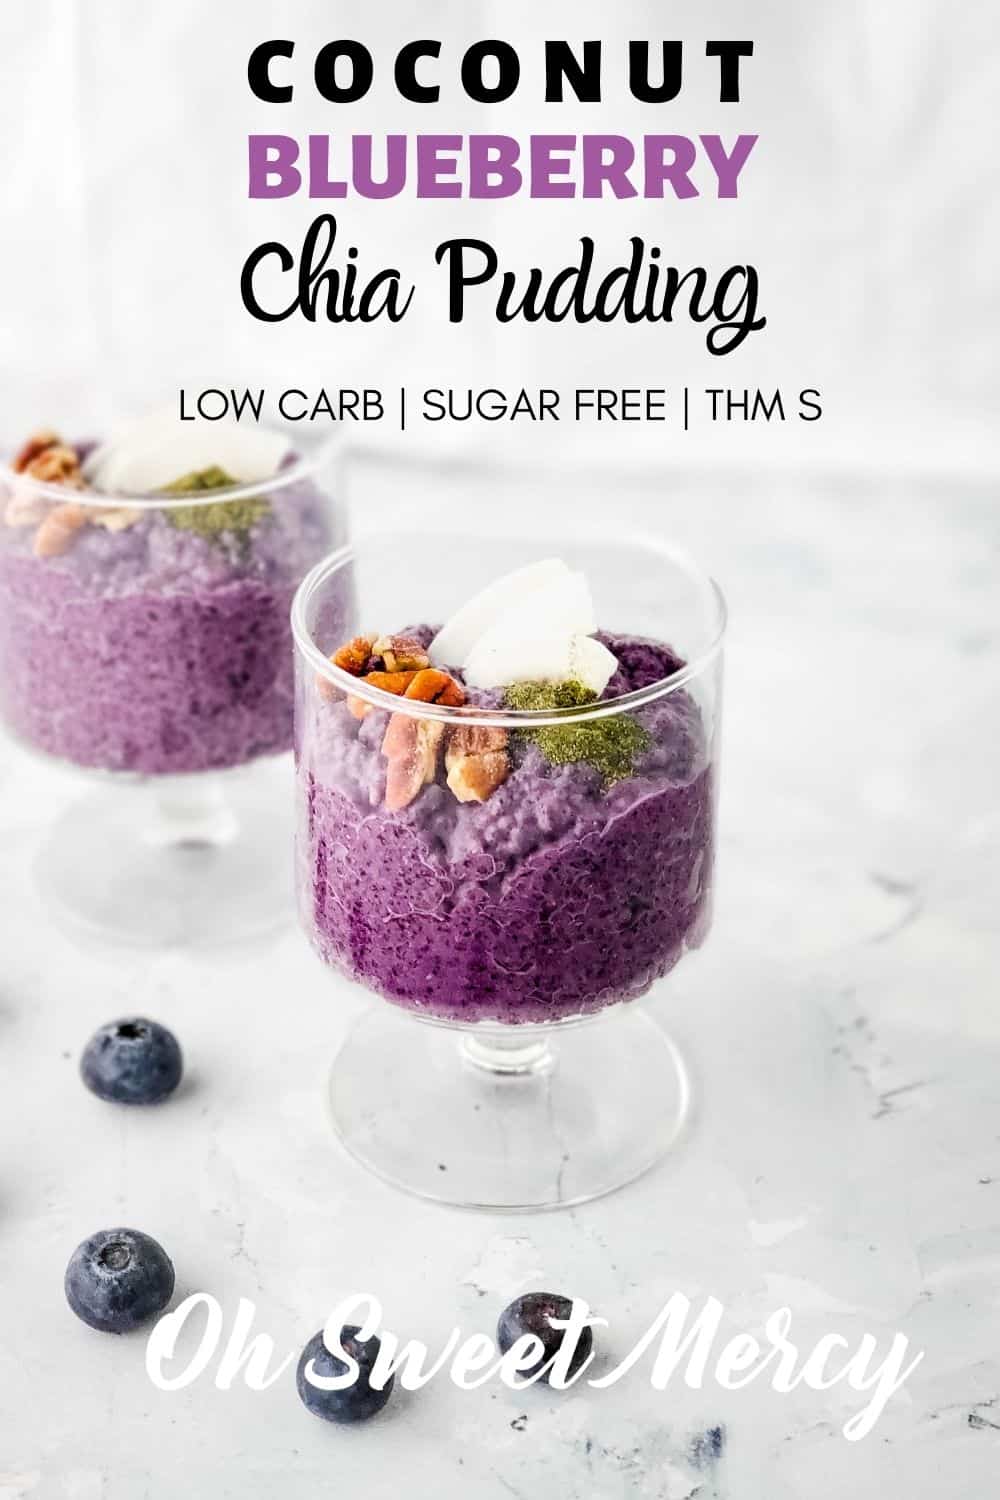 This dairy free Coconut Blueberry Chia Pudding is quick and easy to make, plant based, and packed with nutrition. It's perfect for stirring your new THM Dynamic Duo Greens Powder (or your favorite greens powder) into for an added boost of nutrition. Low carb, healthy fats, sugar free, and THM friendly. #thm #lowcarb #sugarfree #vegan #plantbased #chiaseeds #chiapudding #keto @ohsweetmercy